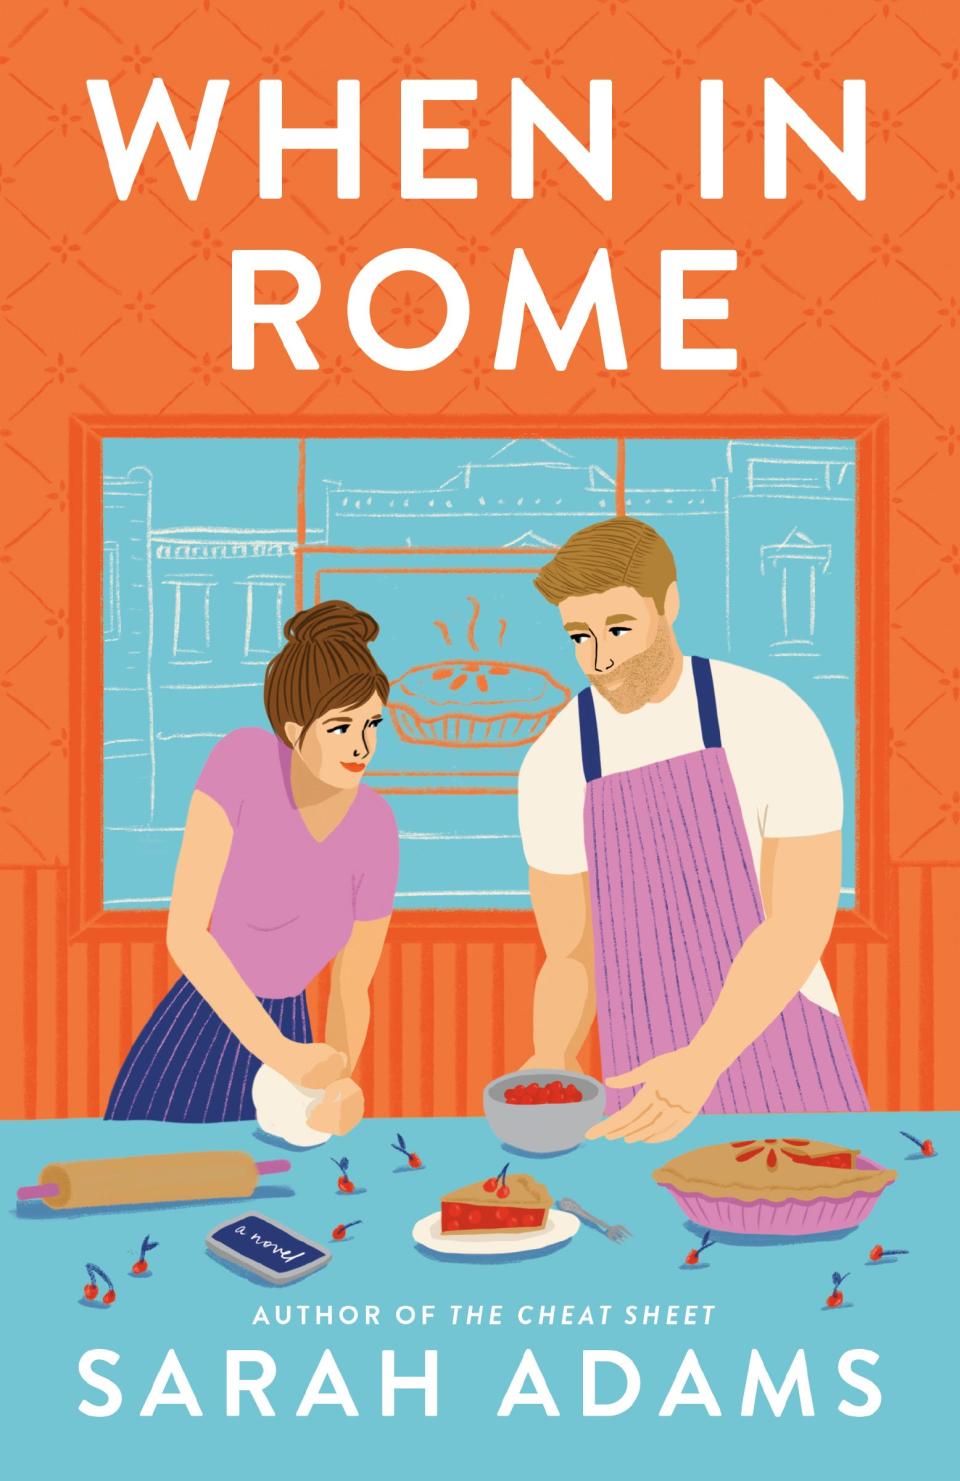 "When in Rome," by Sarah Adams